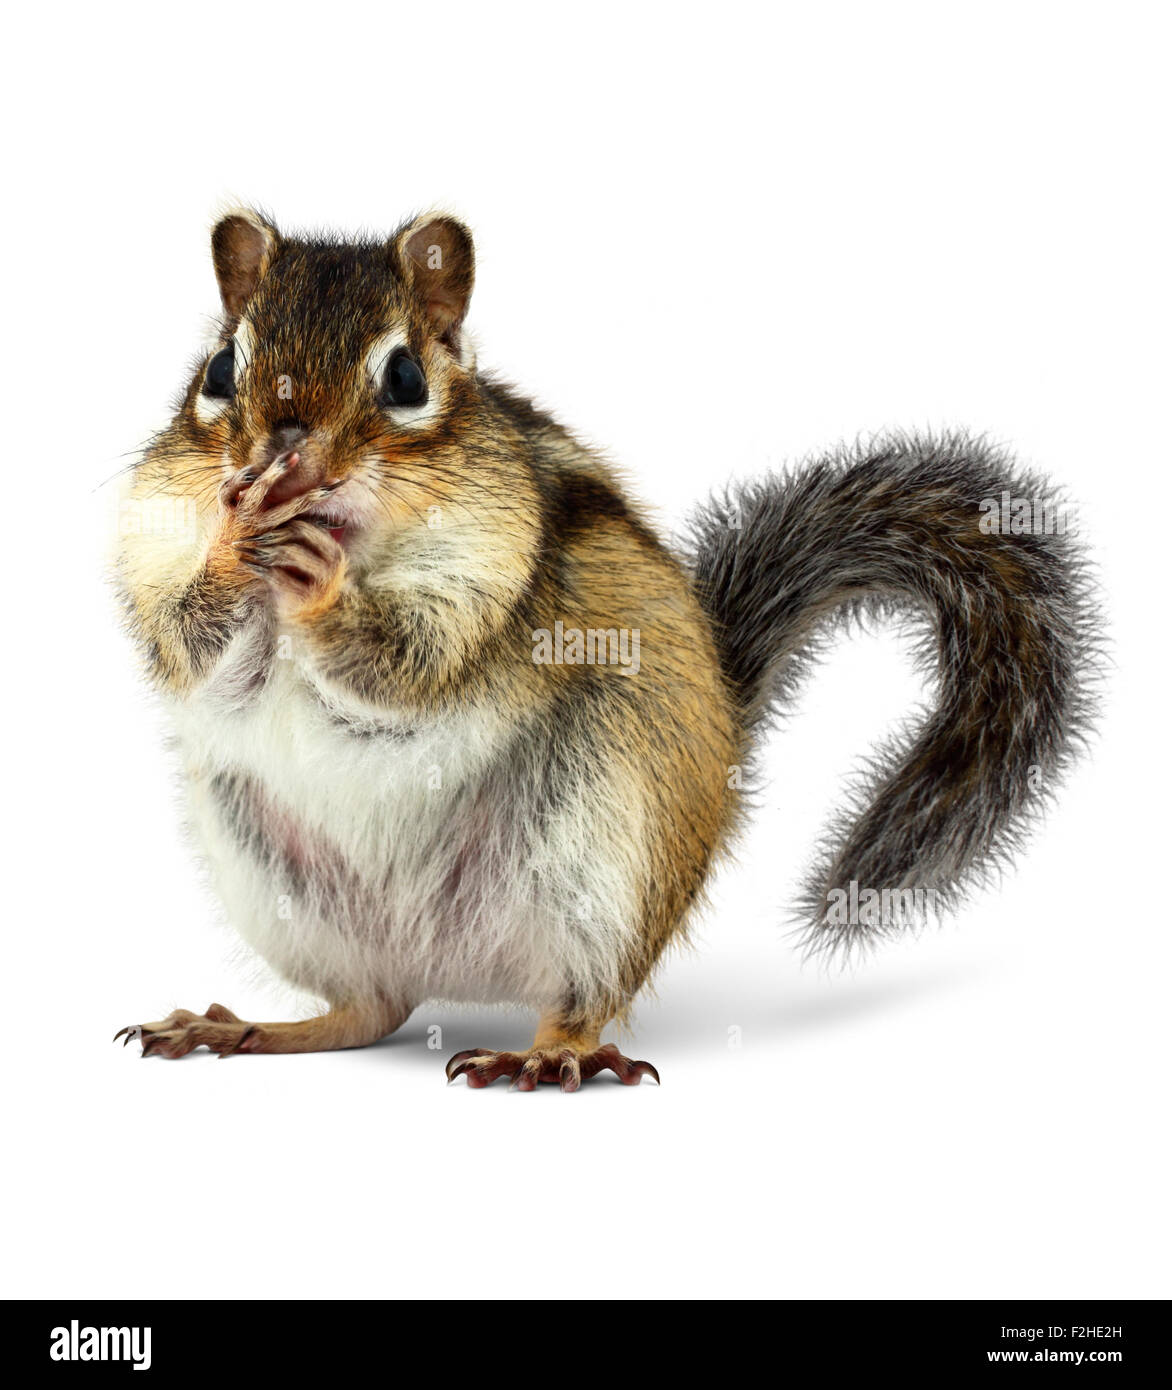 surprised squirrel closes mouth with paws, on white Stock Photo